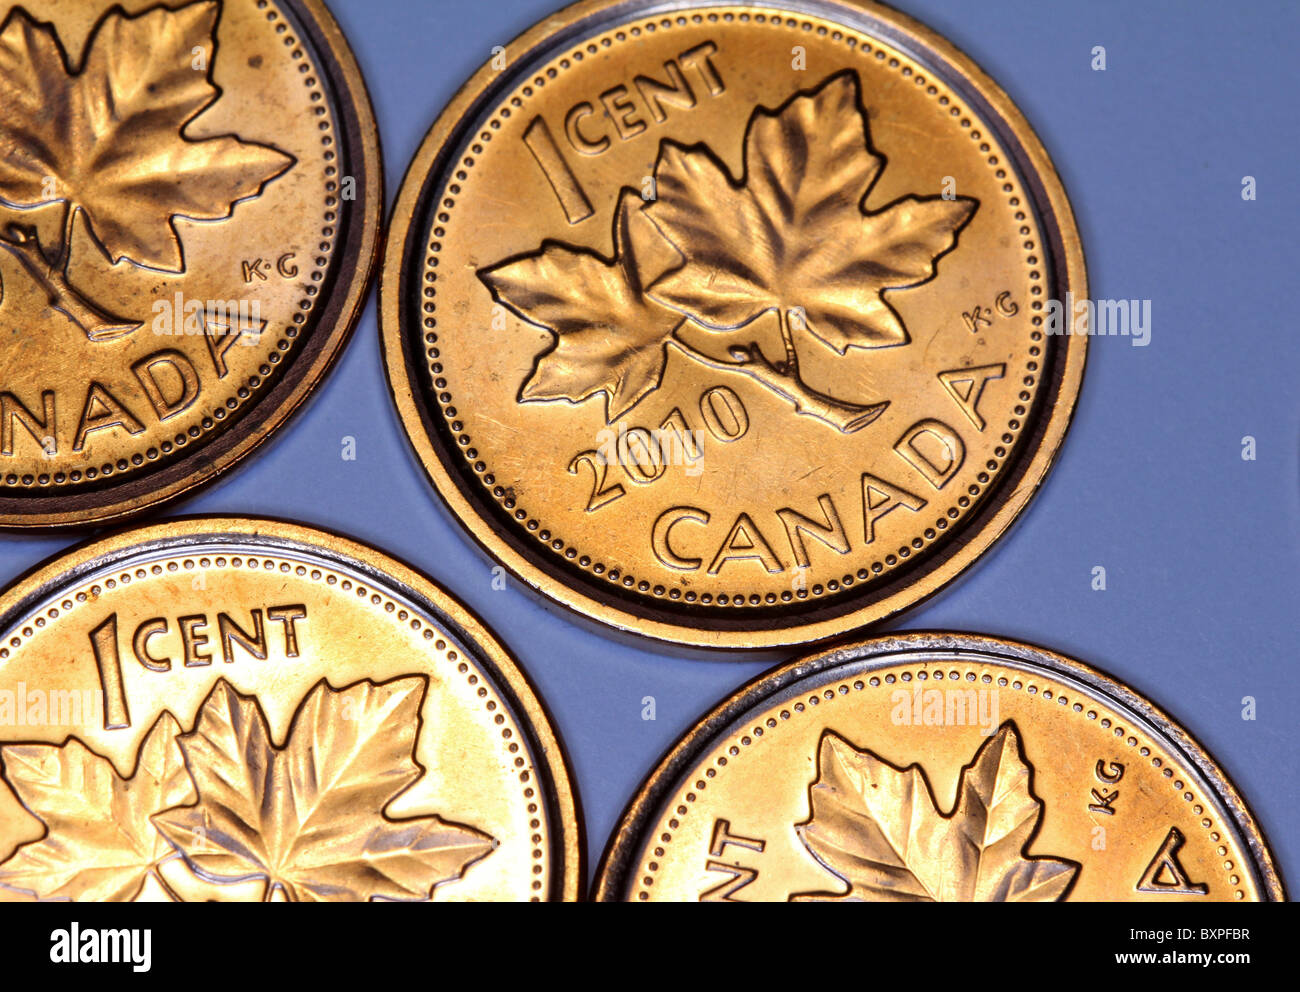 Canadian maple leaf penny 2010 Foto Stock